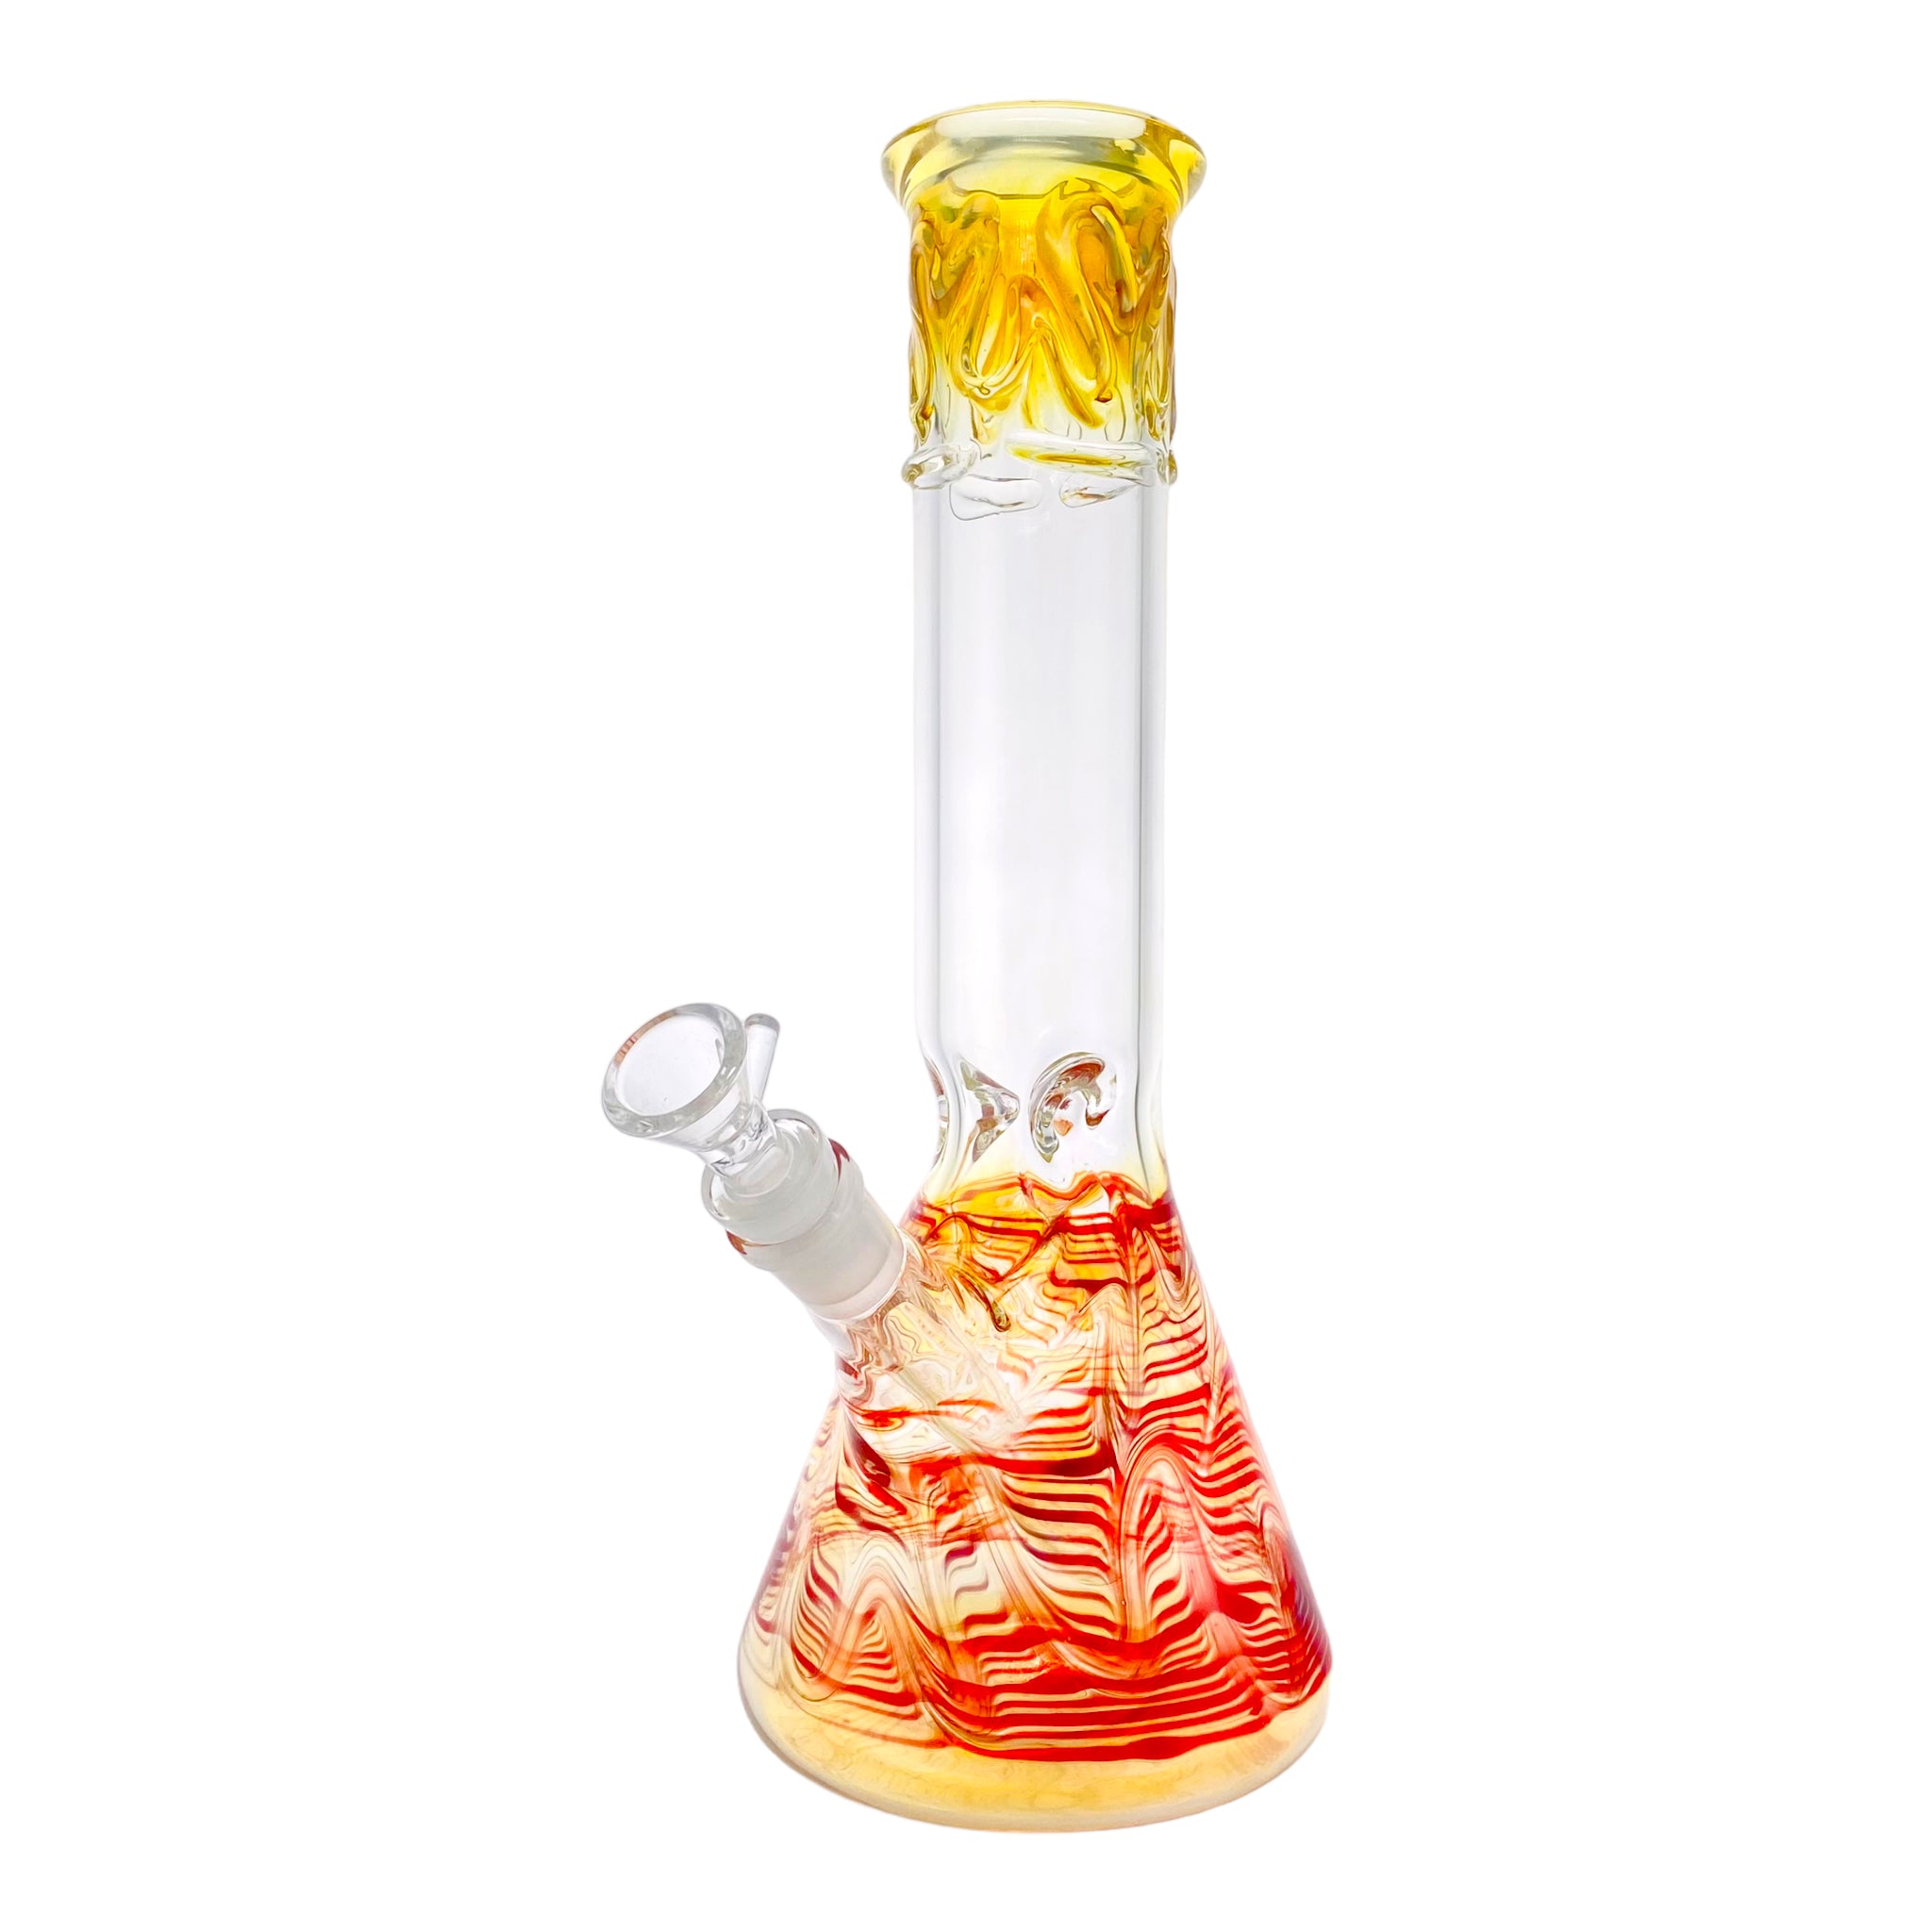 12 Inch Beaker Bong With Color Changing Fuming And Red Wrap And Rake